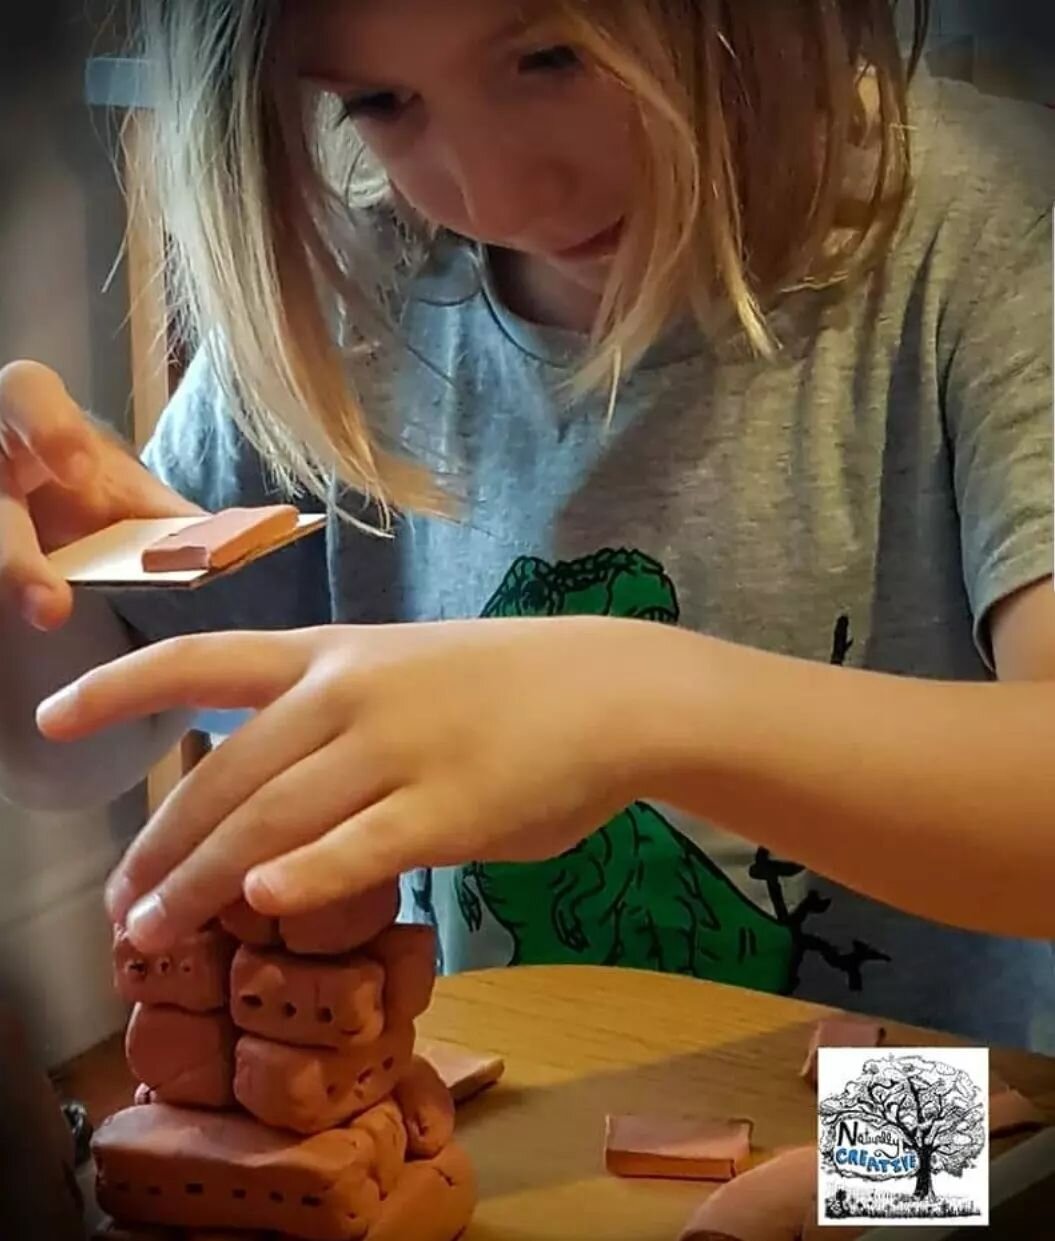 Building bridges large and small scale in response to the London Bridge rhyme in our Transient Rhymes and Jingles book!🥰🦋🌸
 Why not try making mini bricks from air dry clay and collecting a variety of loose parts that could be used to build bridge